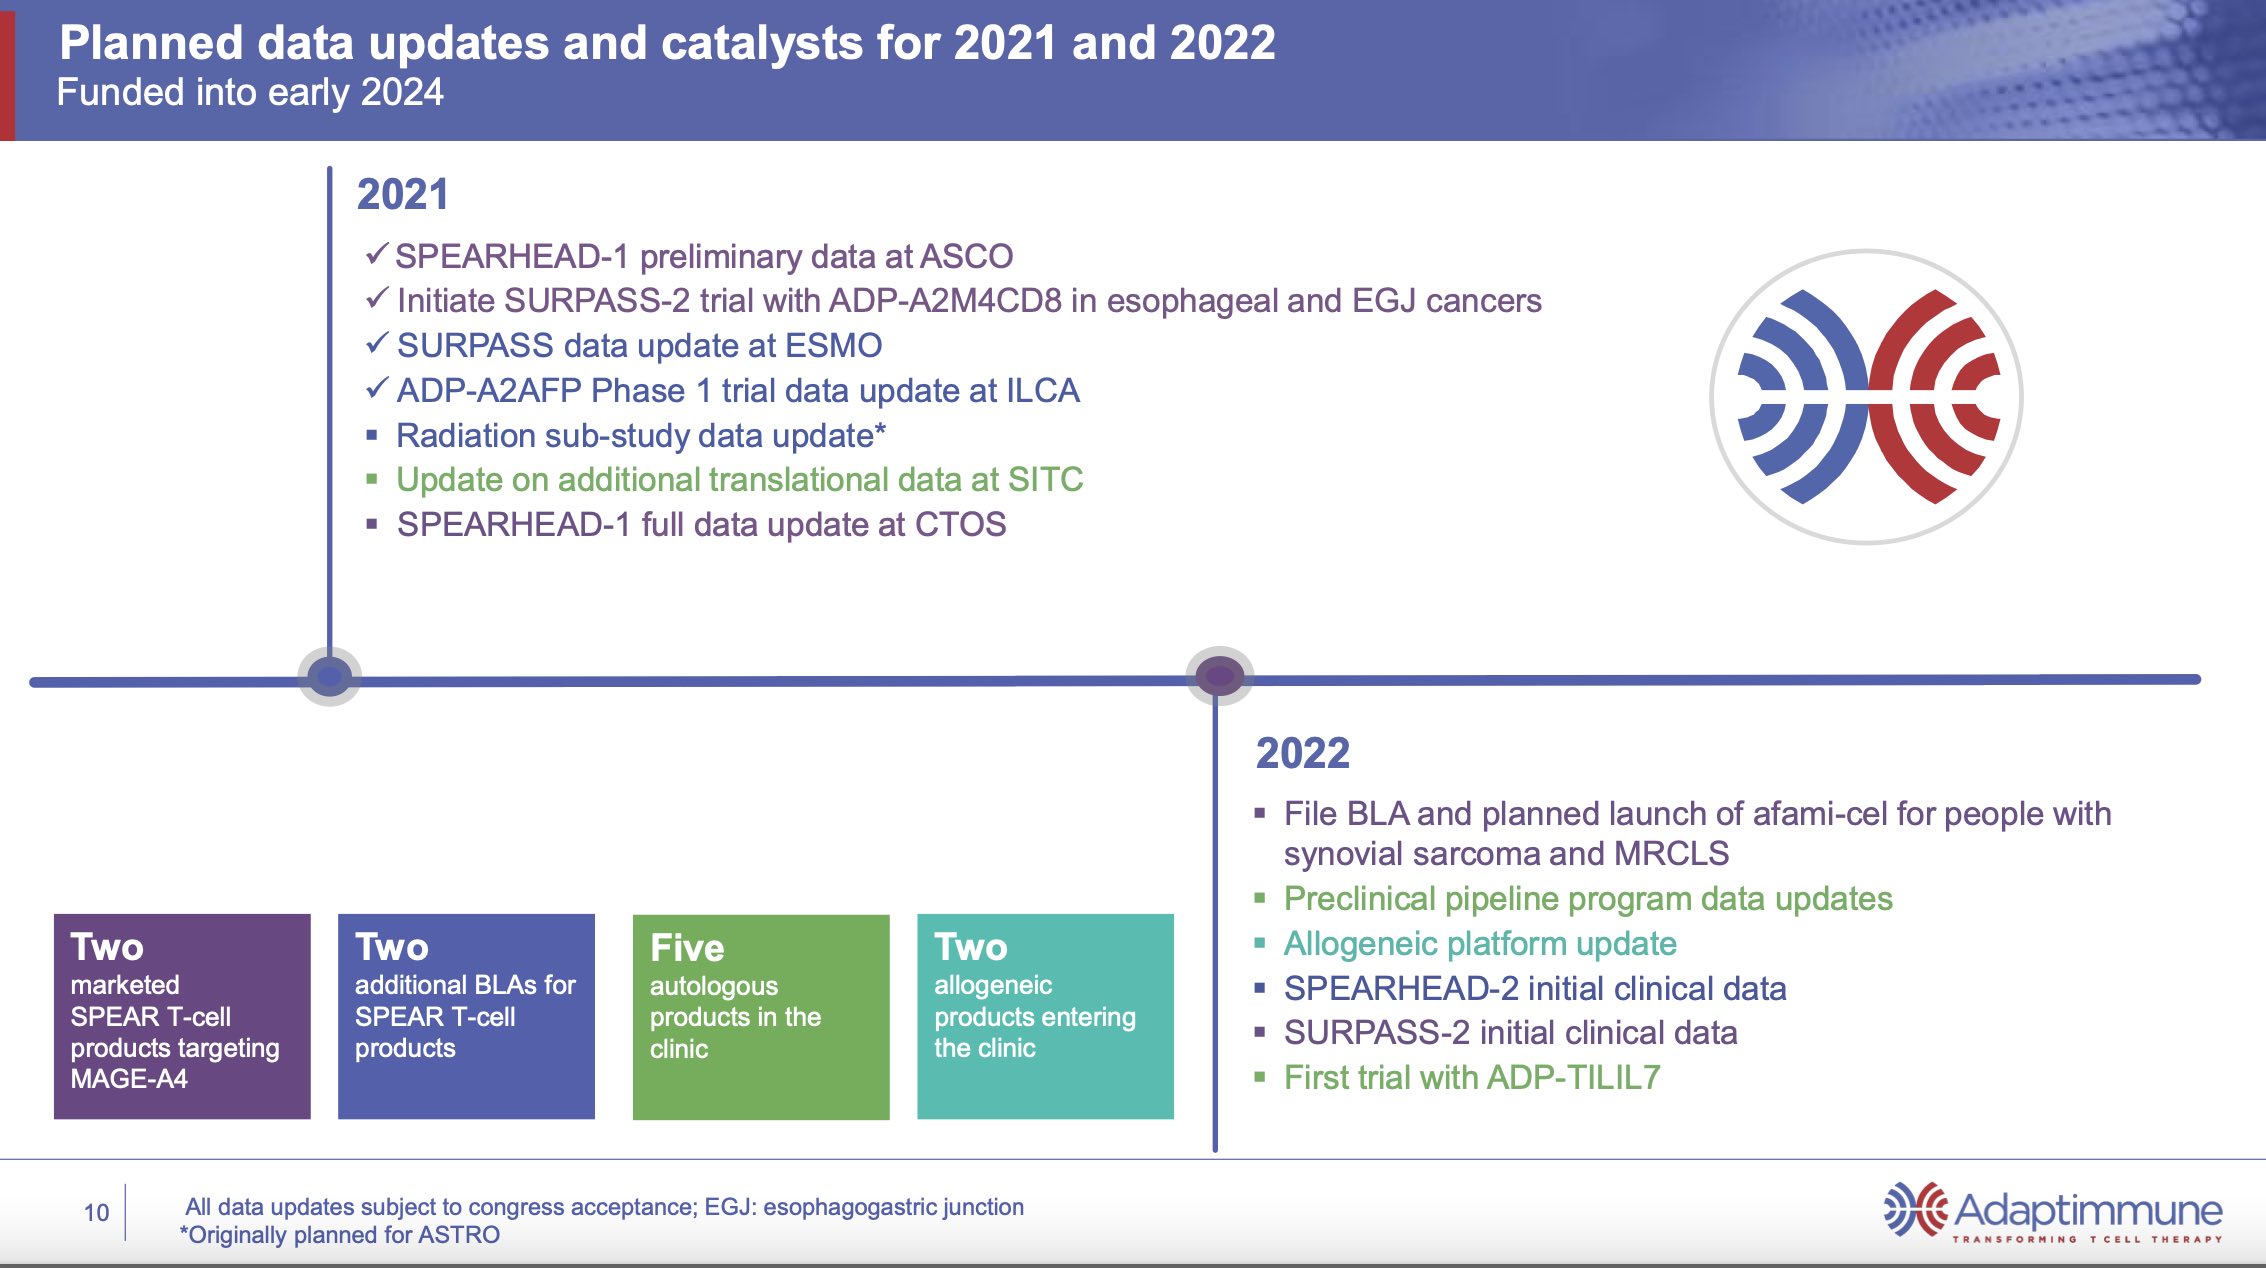 ADAP: Adaptimmune - Transforming T-Cell therapy 1277052